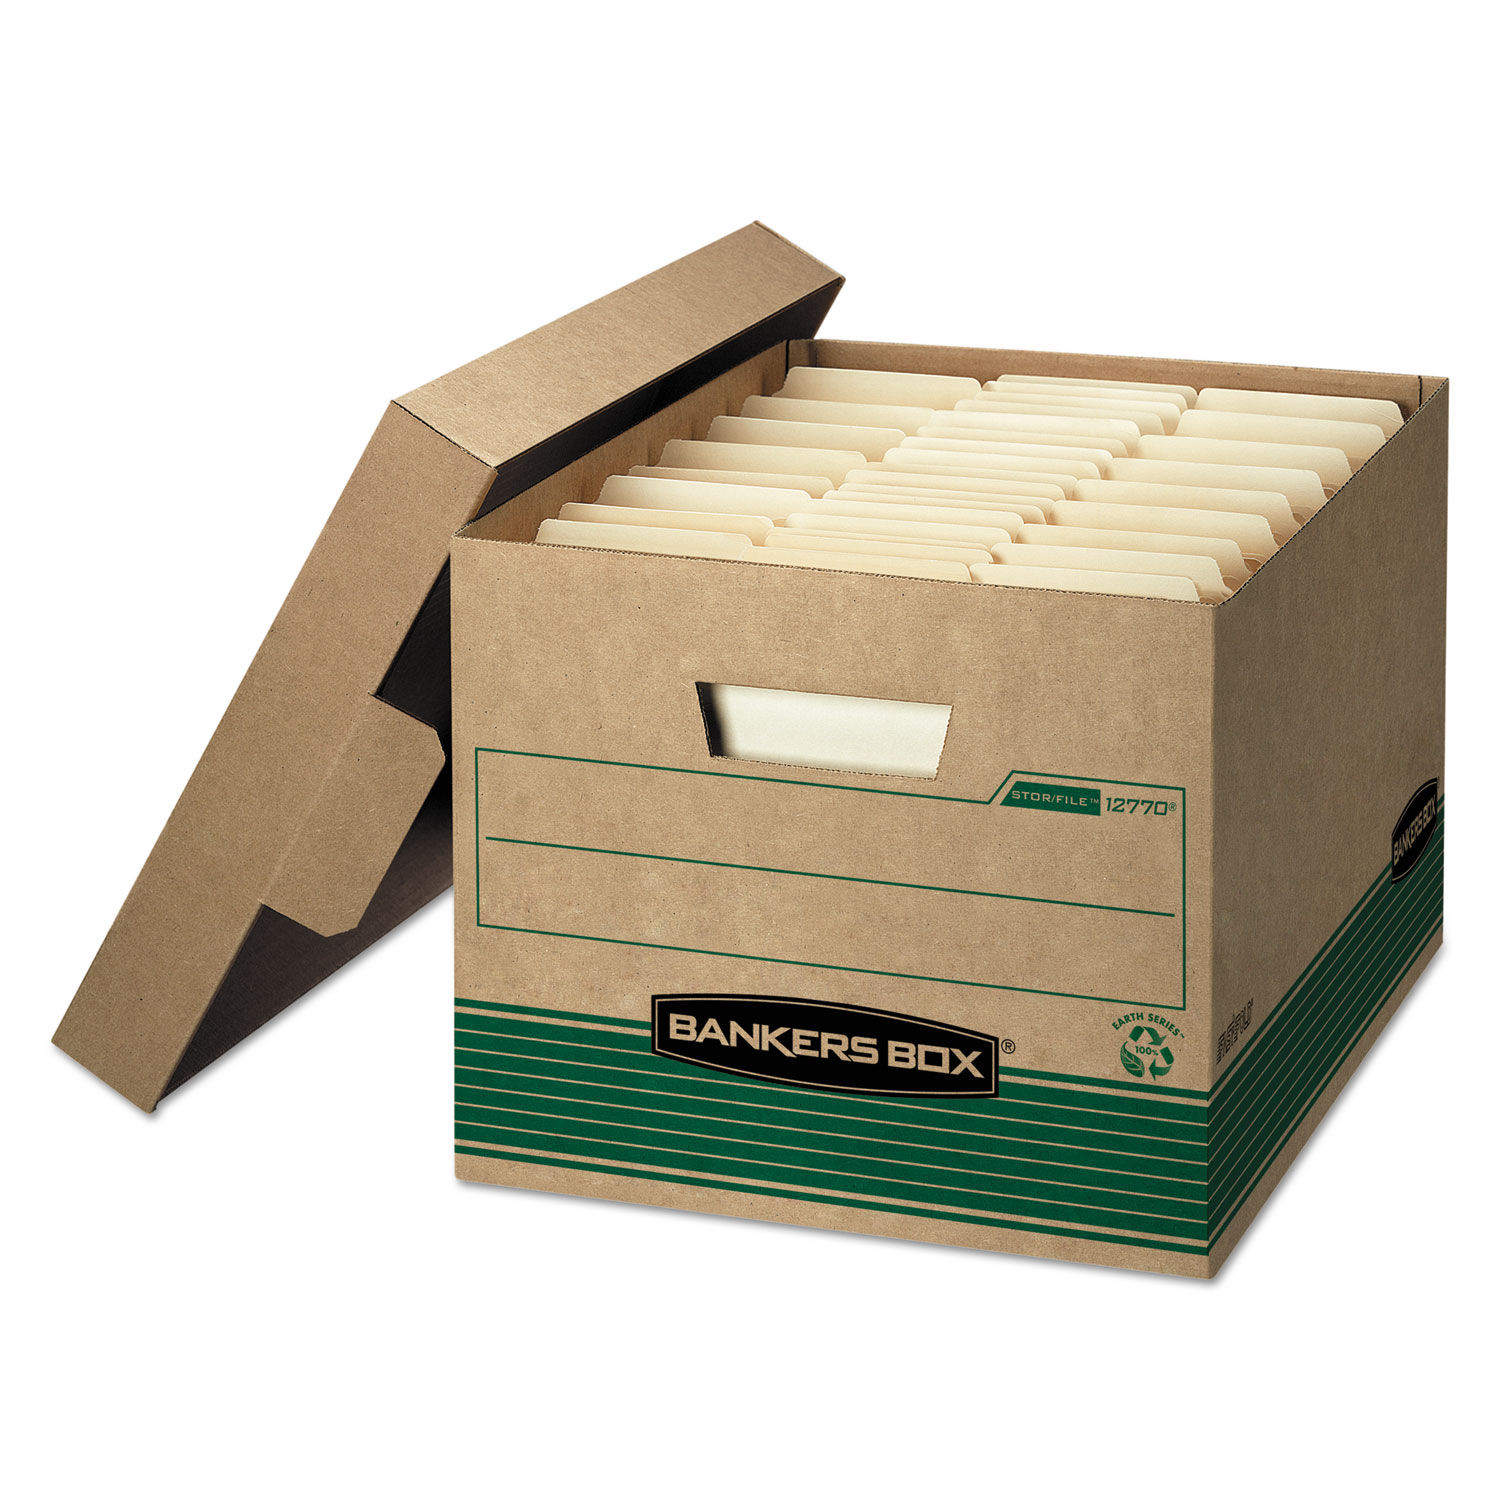 STOR/FILE Medium-Duty 100% Recycled Storage Boxes Letter/Legal Files, 12.5" x 16.25" x 10.25", Kraft/Green, 12/Carton